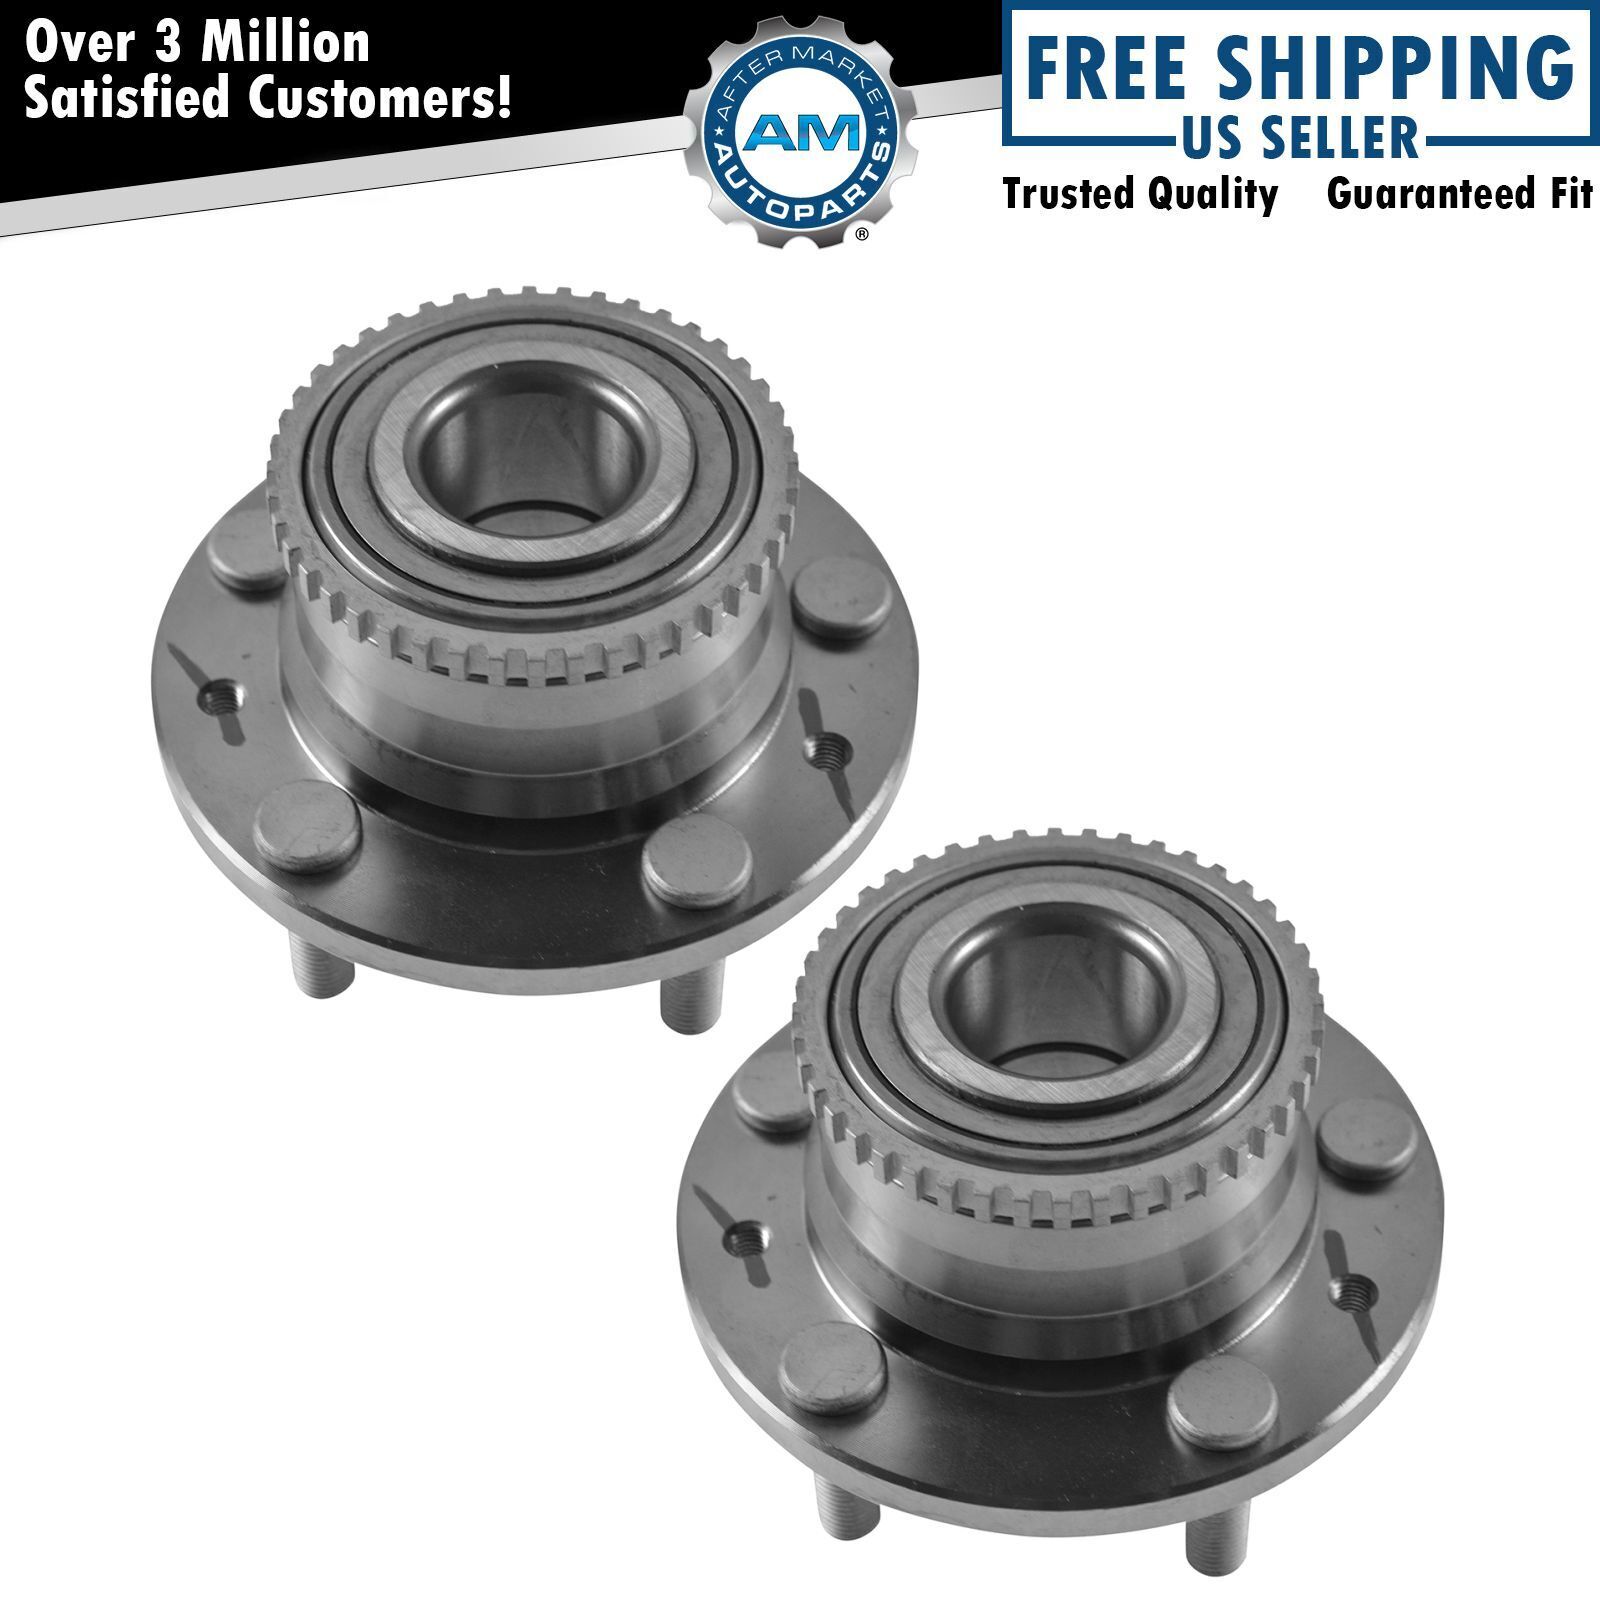 Wheel Bearing and Hub Assembly Pair for Mazda MPV Millenia Protege w/ ABS